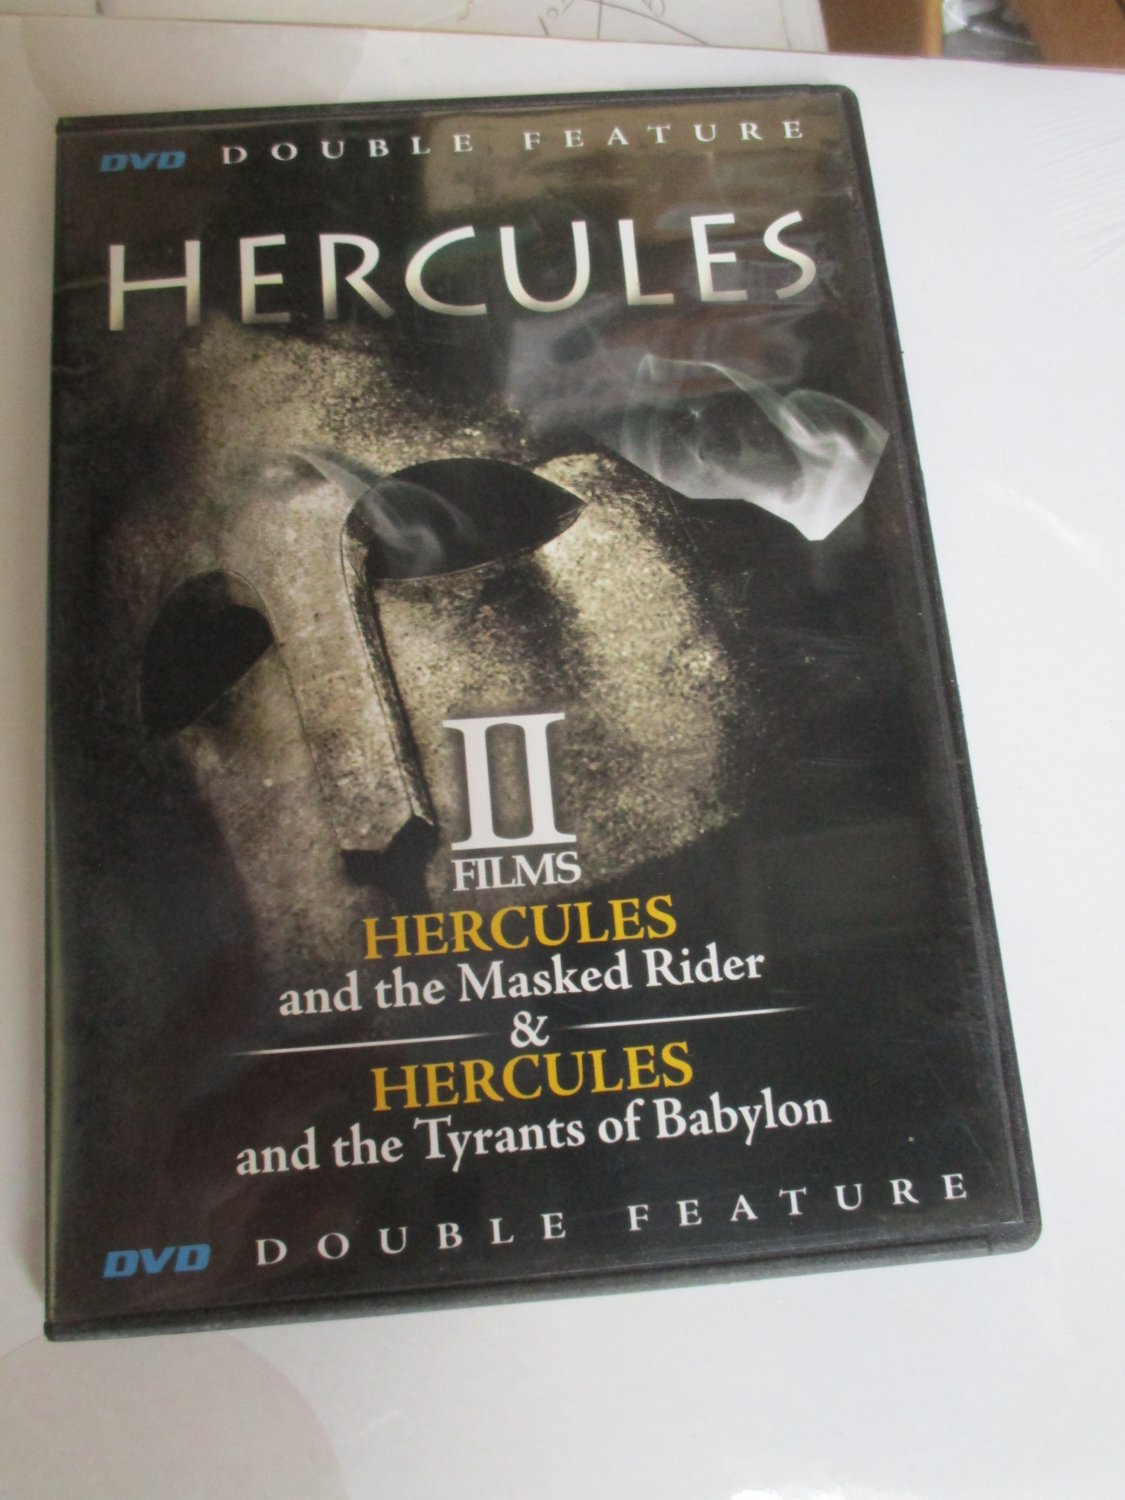 Hercules and the Masked Rider&Hurcules&the Tyrants of Babaylon DVD DoubleFeature